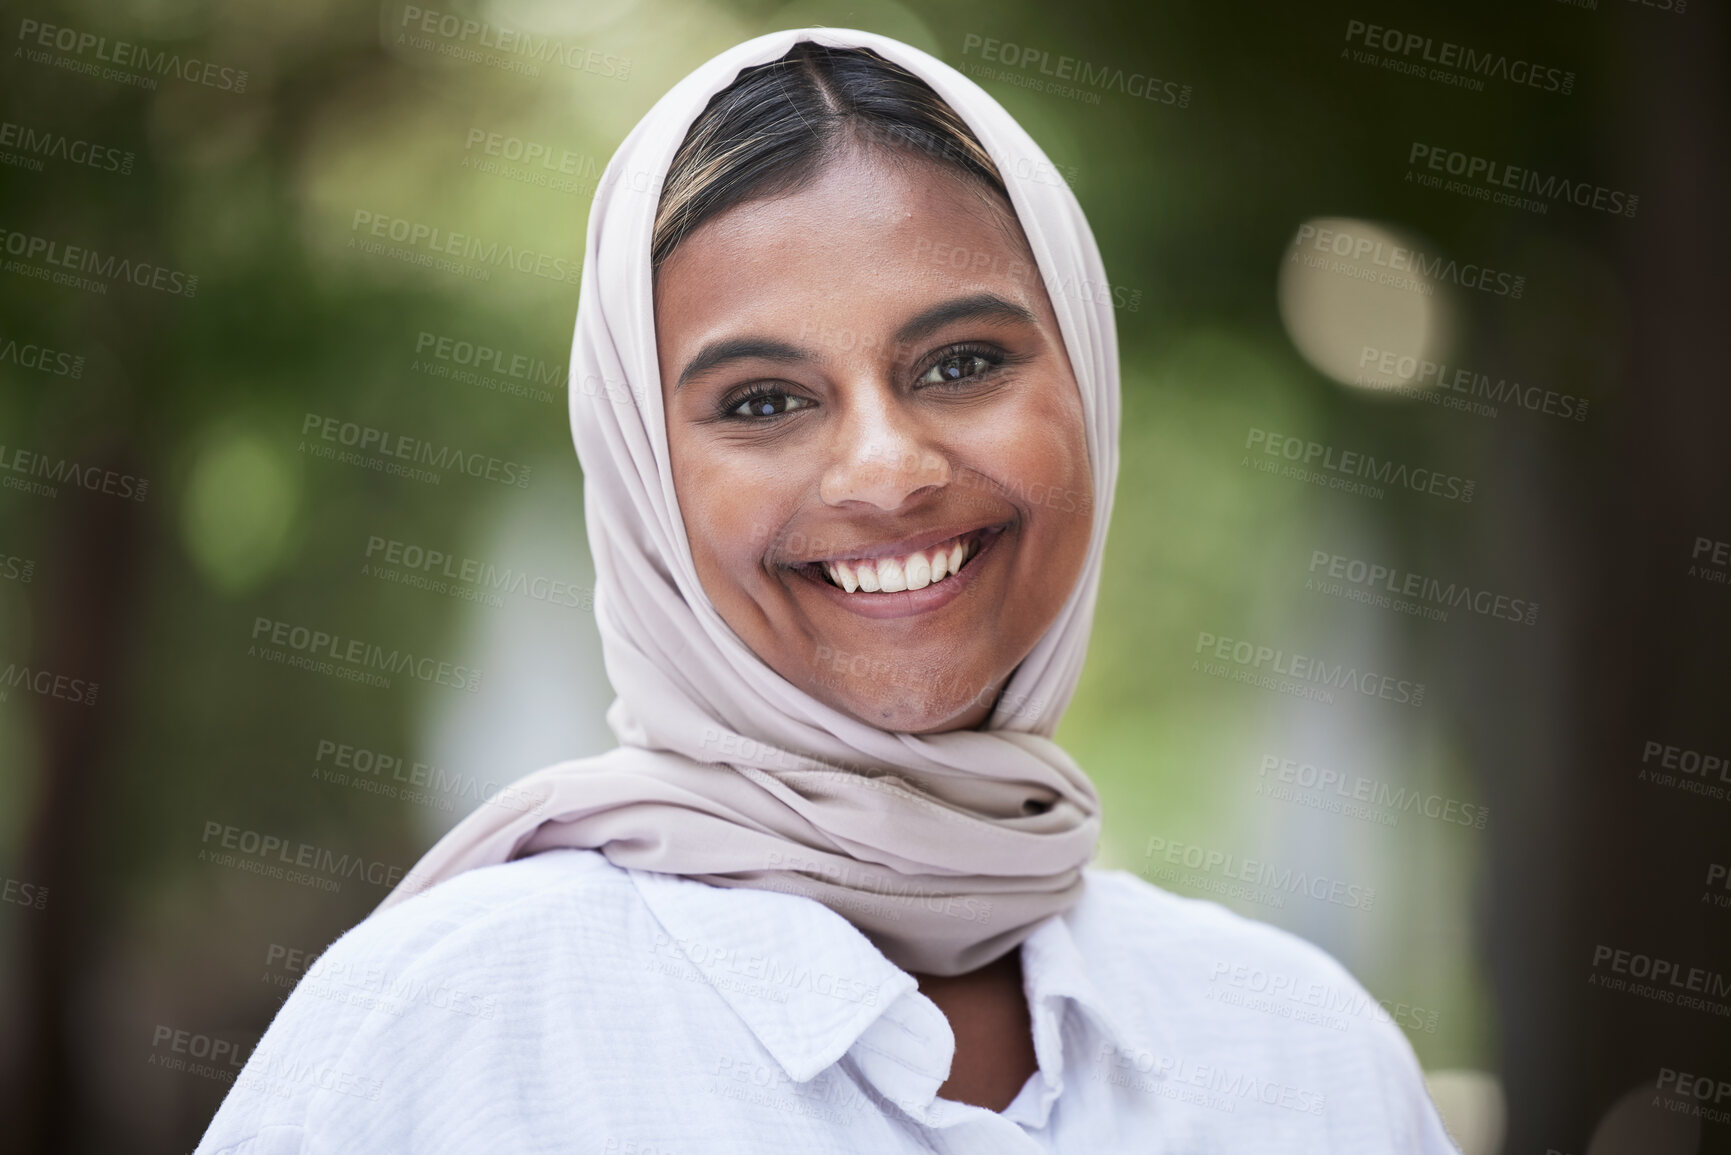 Buy stock photo Nature, happy and portrait of Muslim woman in park for holiday, freedom and relaxing outdoors. Happiness, smile and face of Islamic female person with joy, confidence and positive mindset with hijab